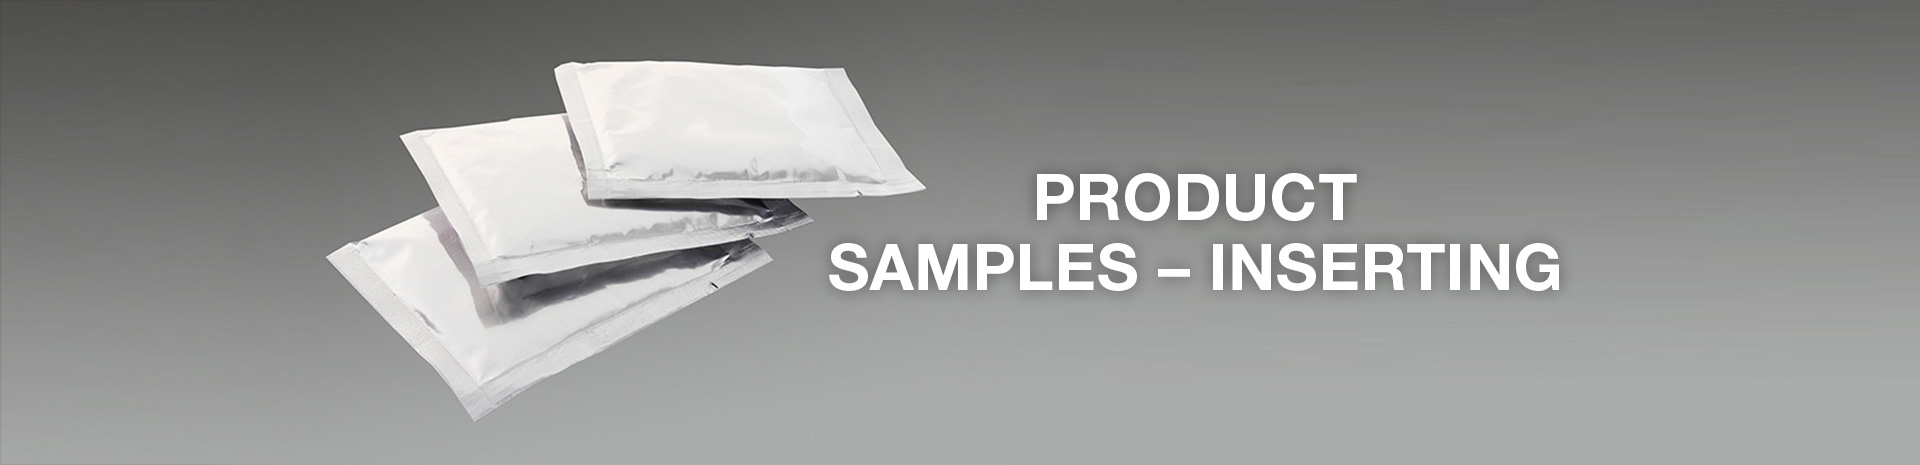 Product samples – inserting